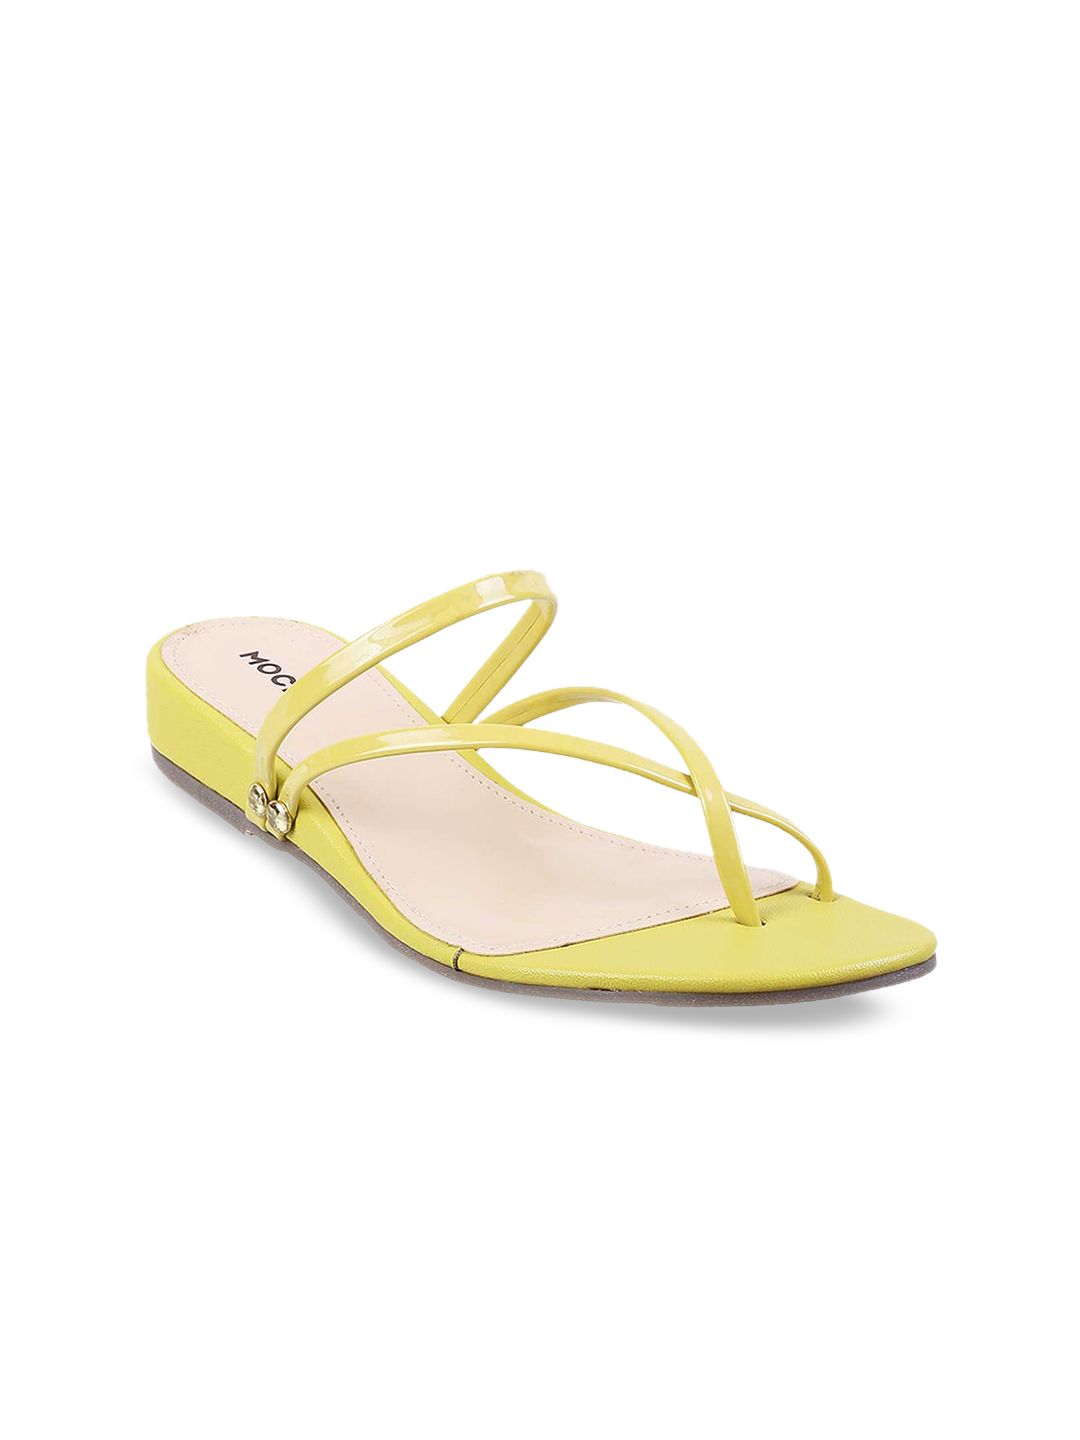 Mochi Yellow Embellished Wedge Sandals Price in India